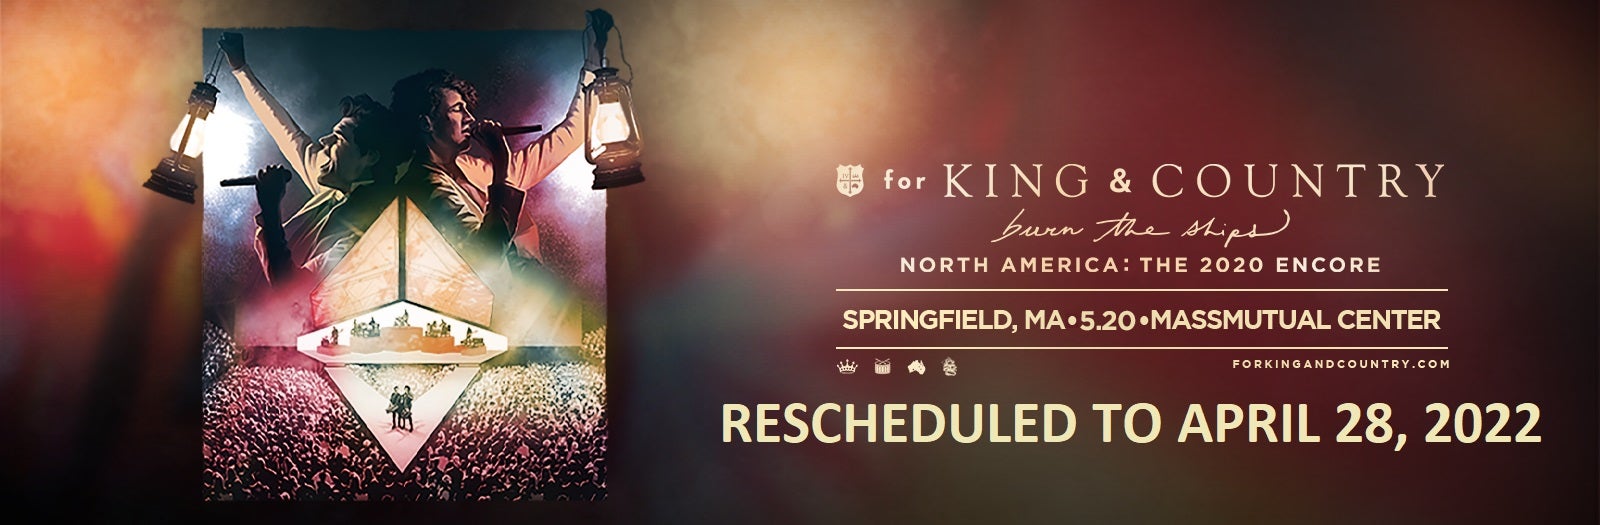 RESCHEDULED to 2022: for KING & COUNTRY